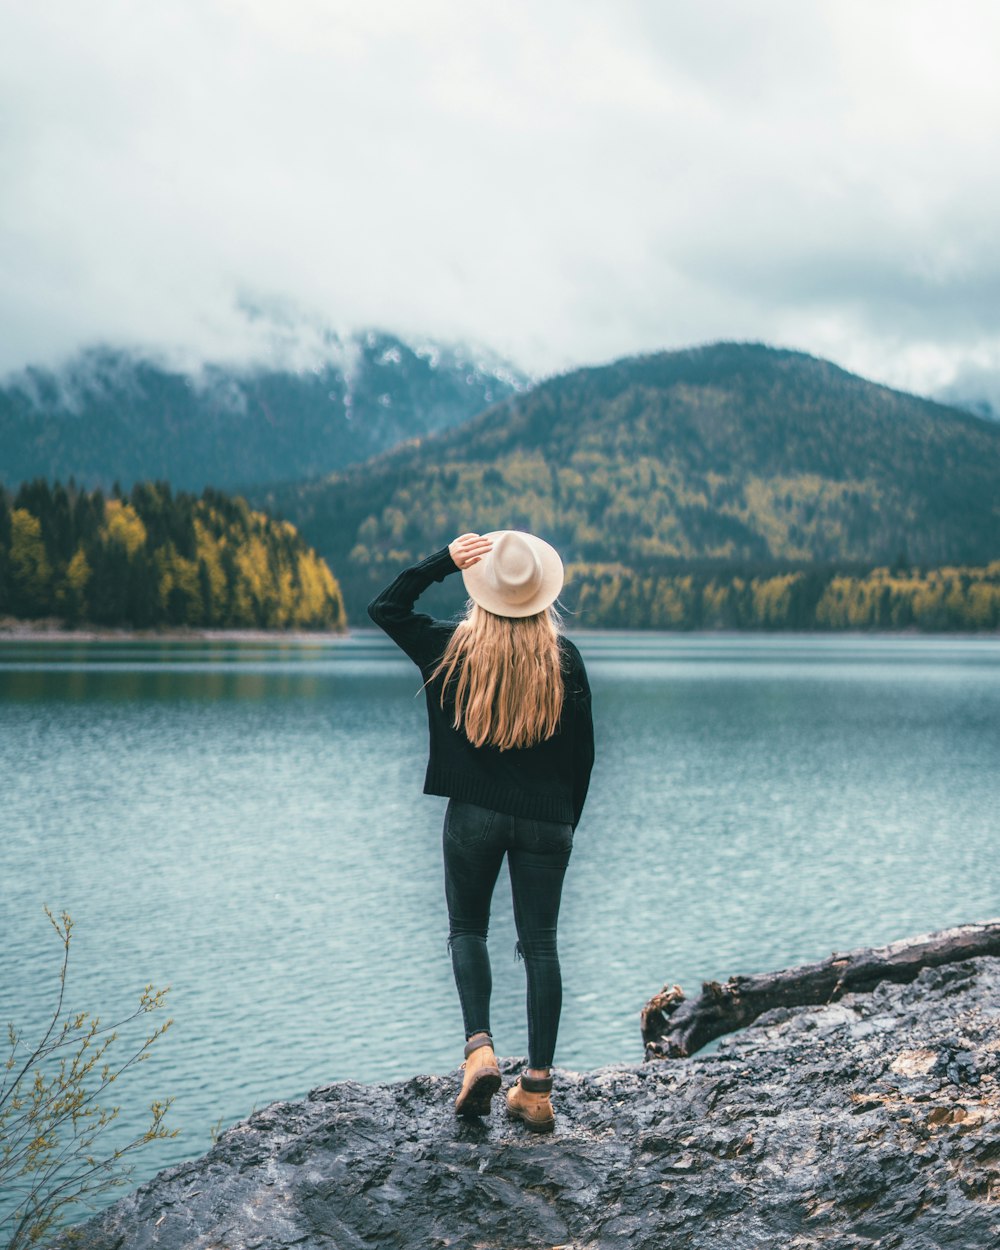 woman in white hat, black jacket, and blue jeans standing near body of water